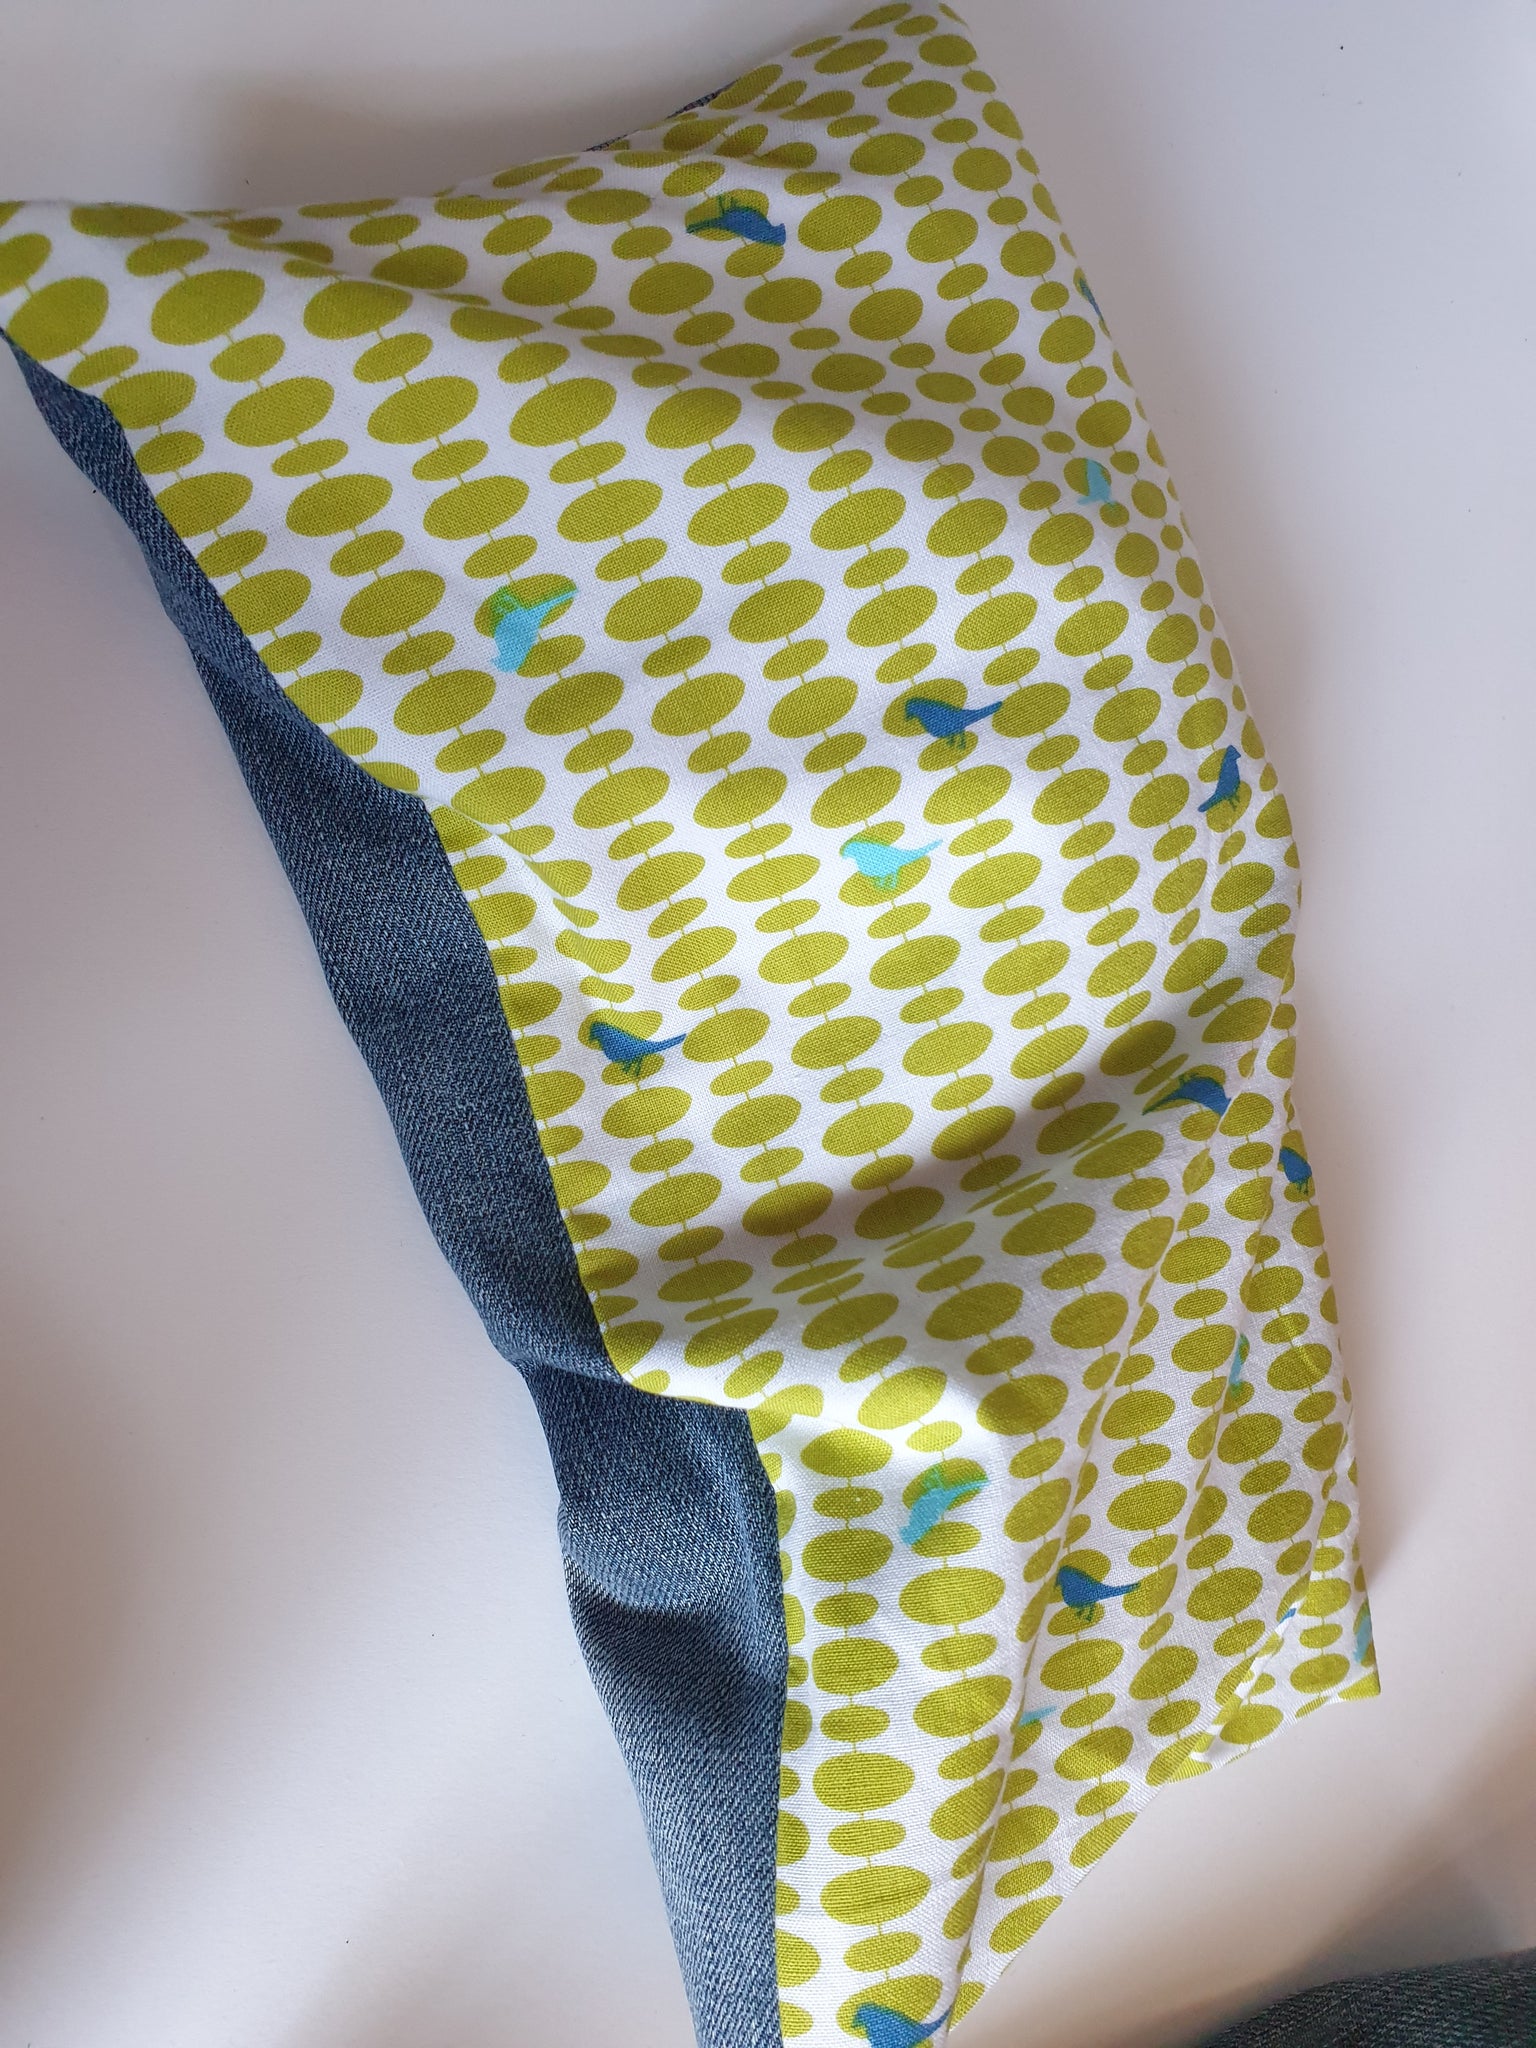 Eco friendly wheat bag made with upcycled fabric - Birdie Print